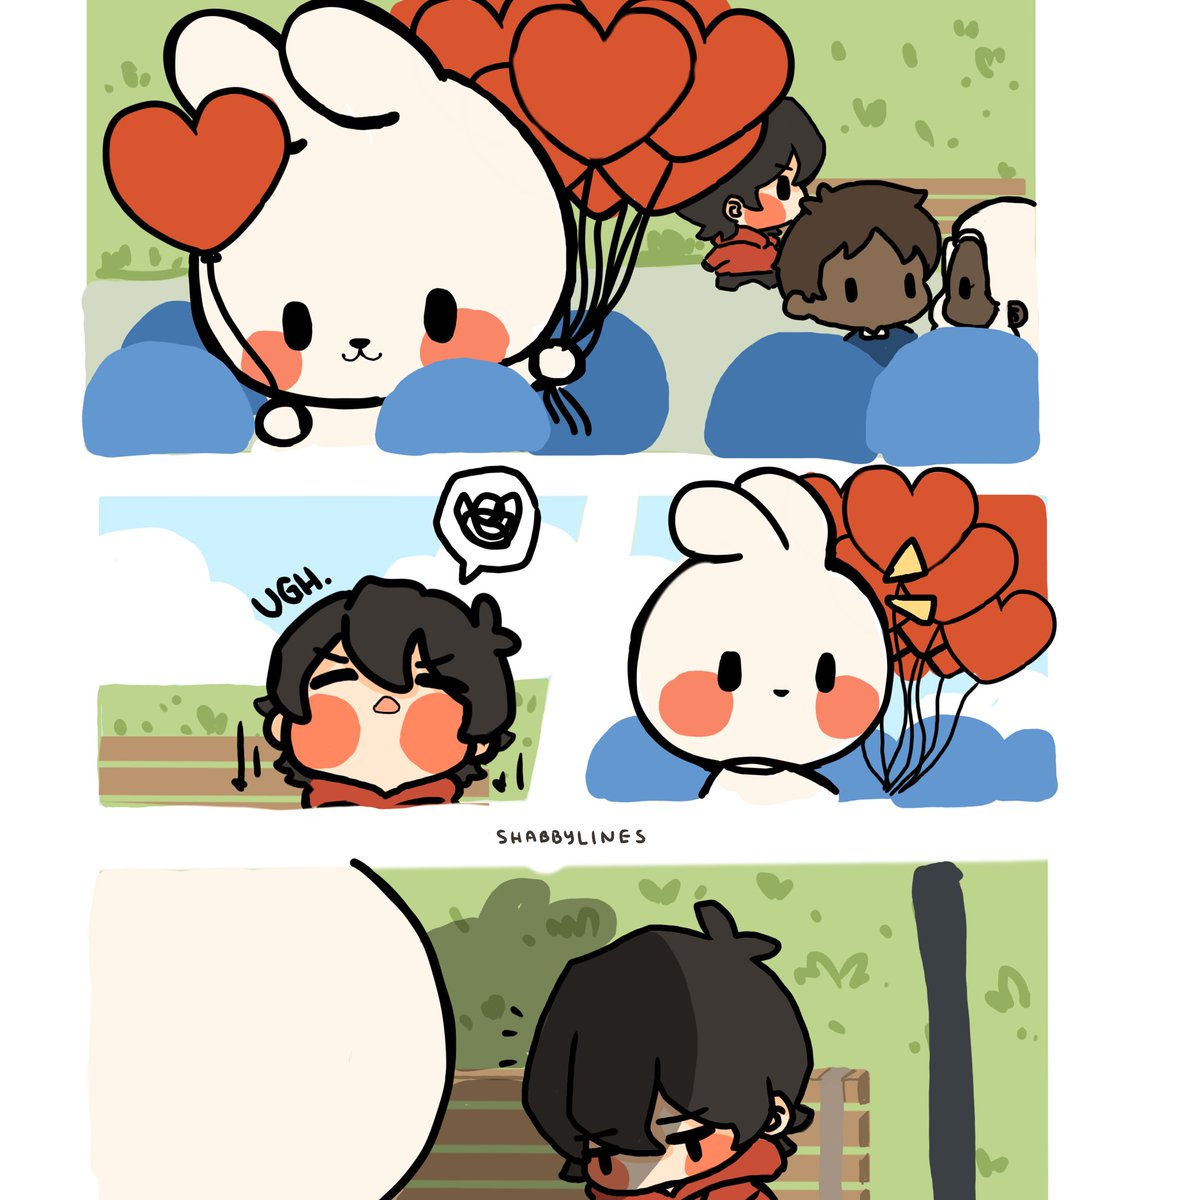 [part 1/3] this is my @mysheithlentine gift for @tinyginger1519! 

#sheith #sheithlentines2020 